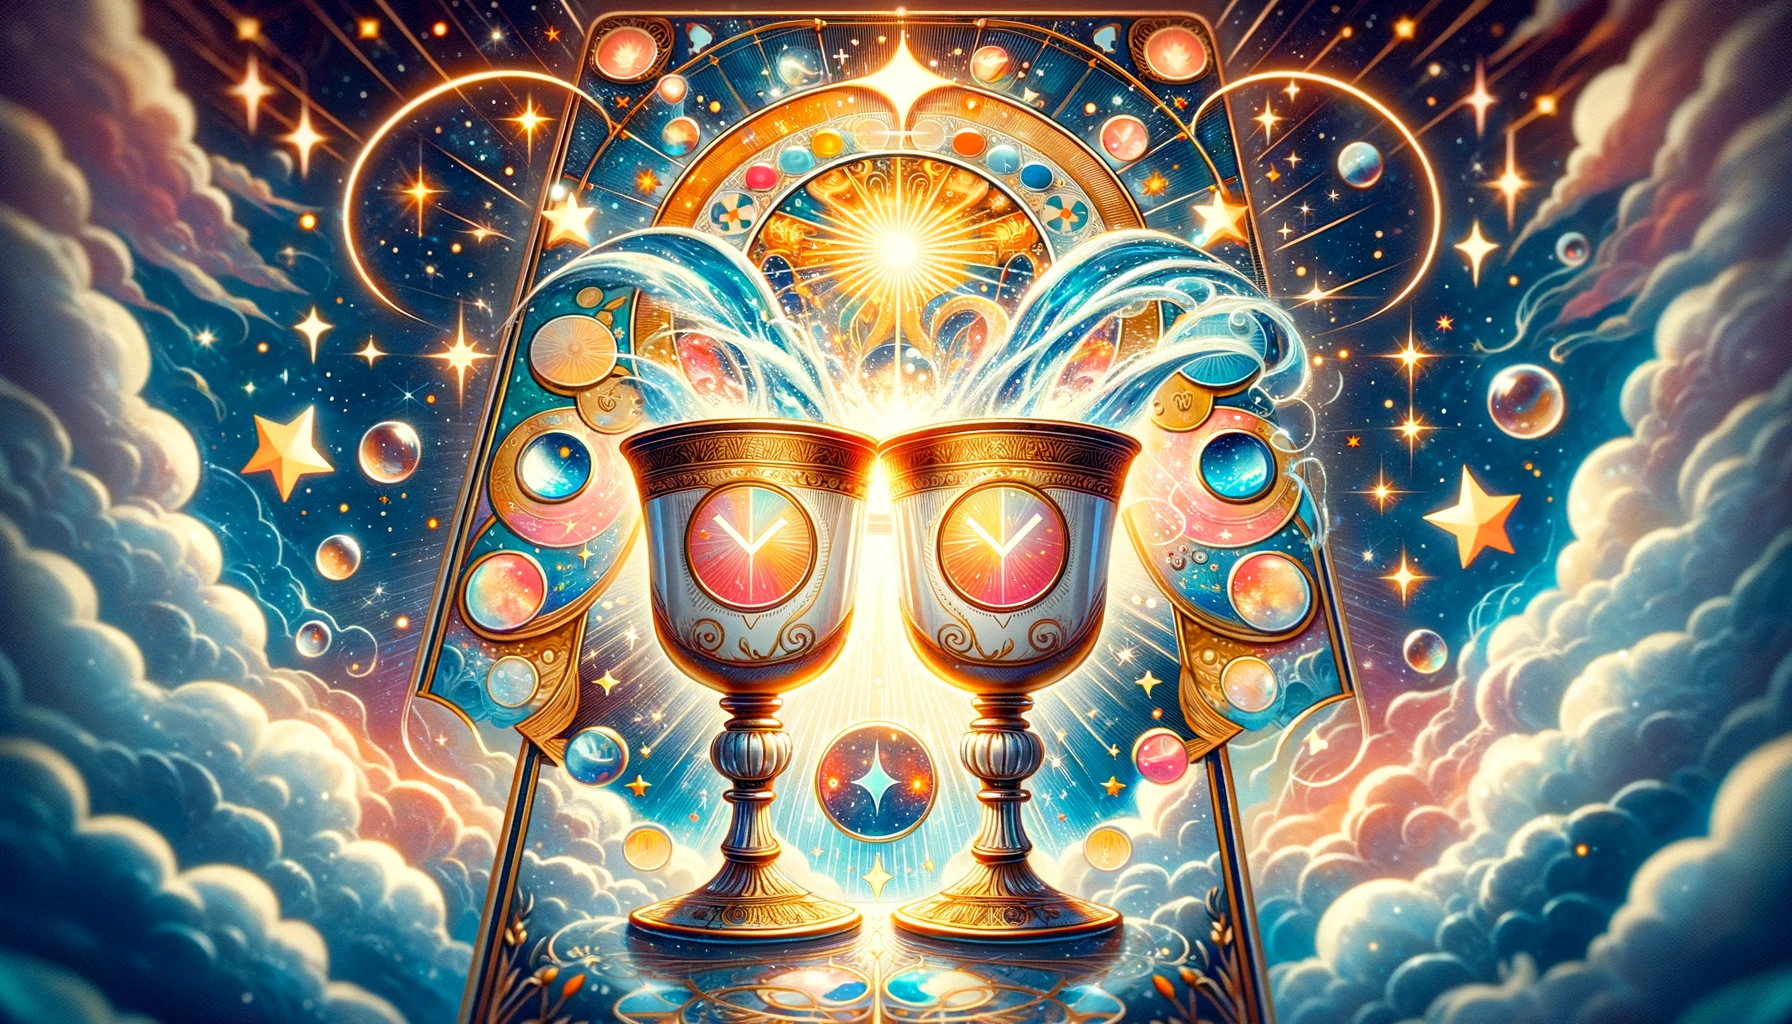 "Illustration depicting two overflowing cups closely positioned, surrounded by symbols of affirmation against a vibrant backdrop. Reflects the essence of mutual agreement, harmonious union, and clarity symbolizing a definitive 'Yes' in a Tarot reading, suggesting successful partnerships and positive outcomes."